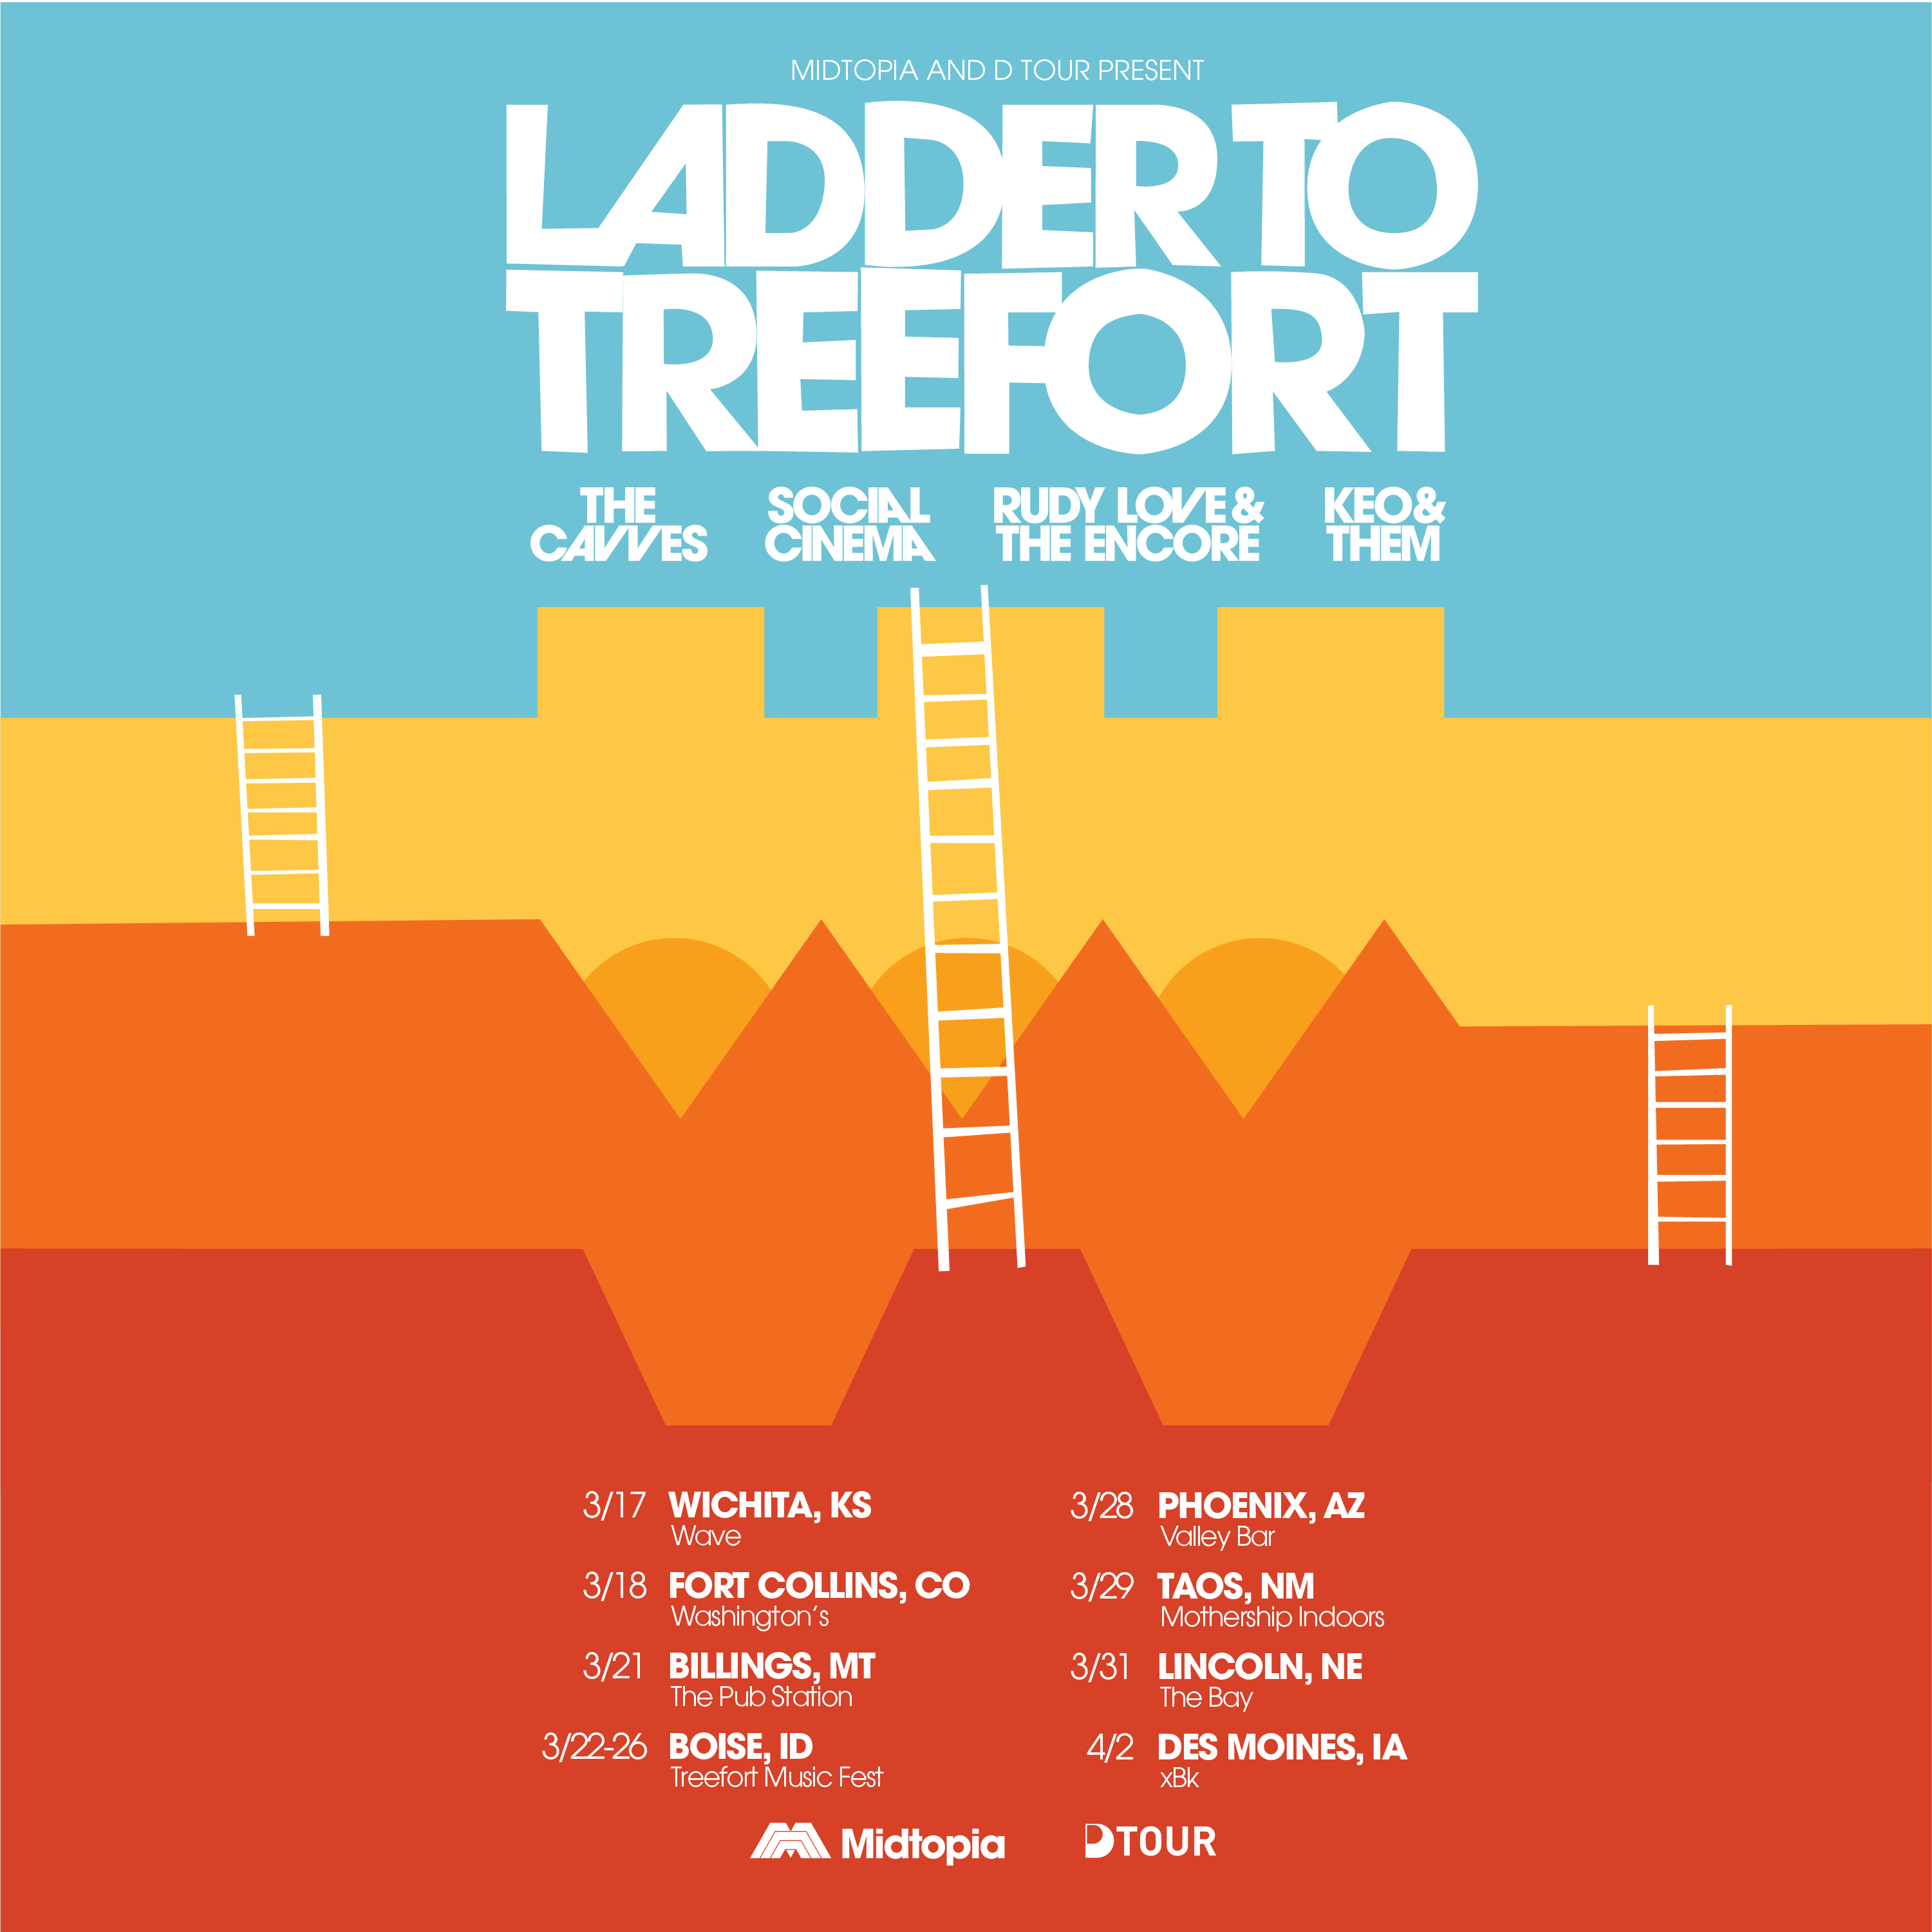 Wichita-Events-Midtopia-and-D-Tour-Present-Ladder-To-Treefort-at-Wave